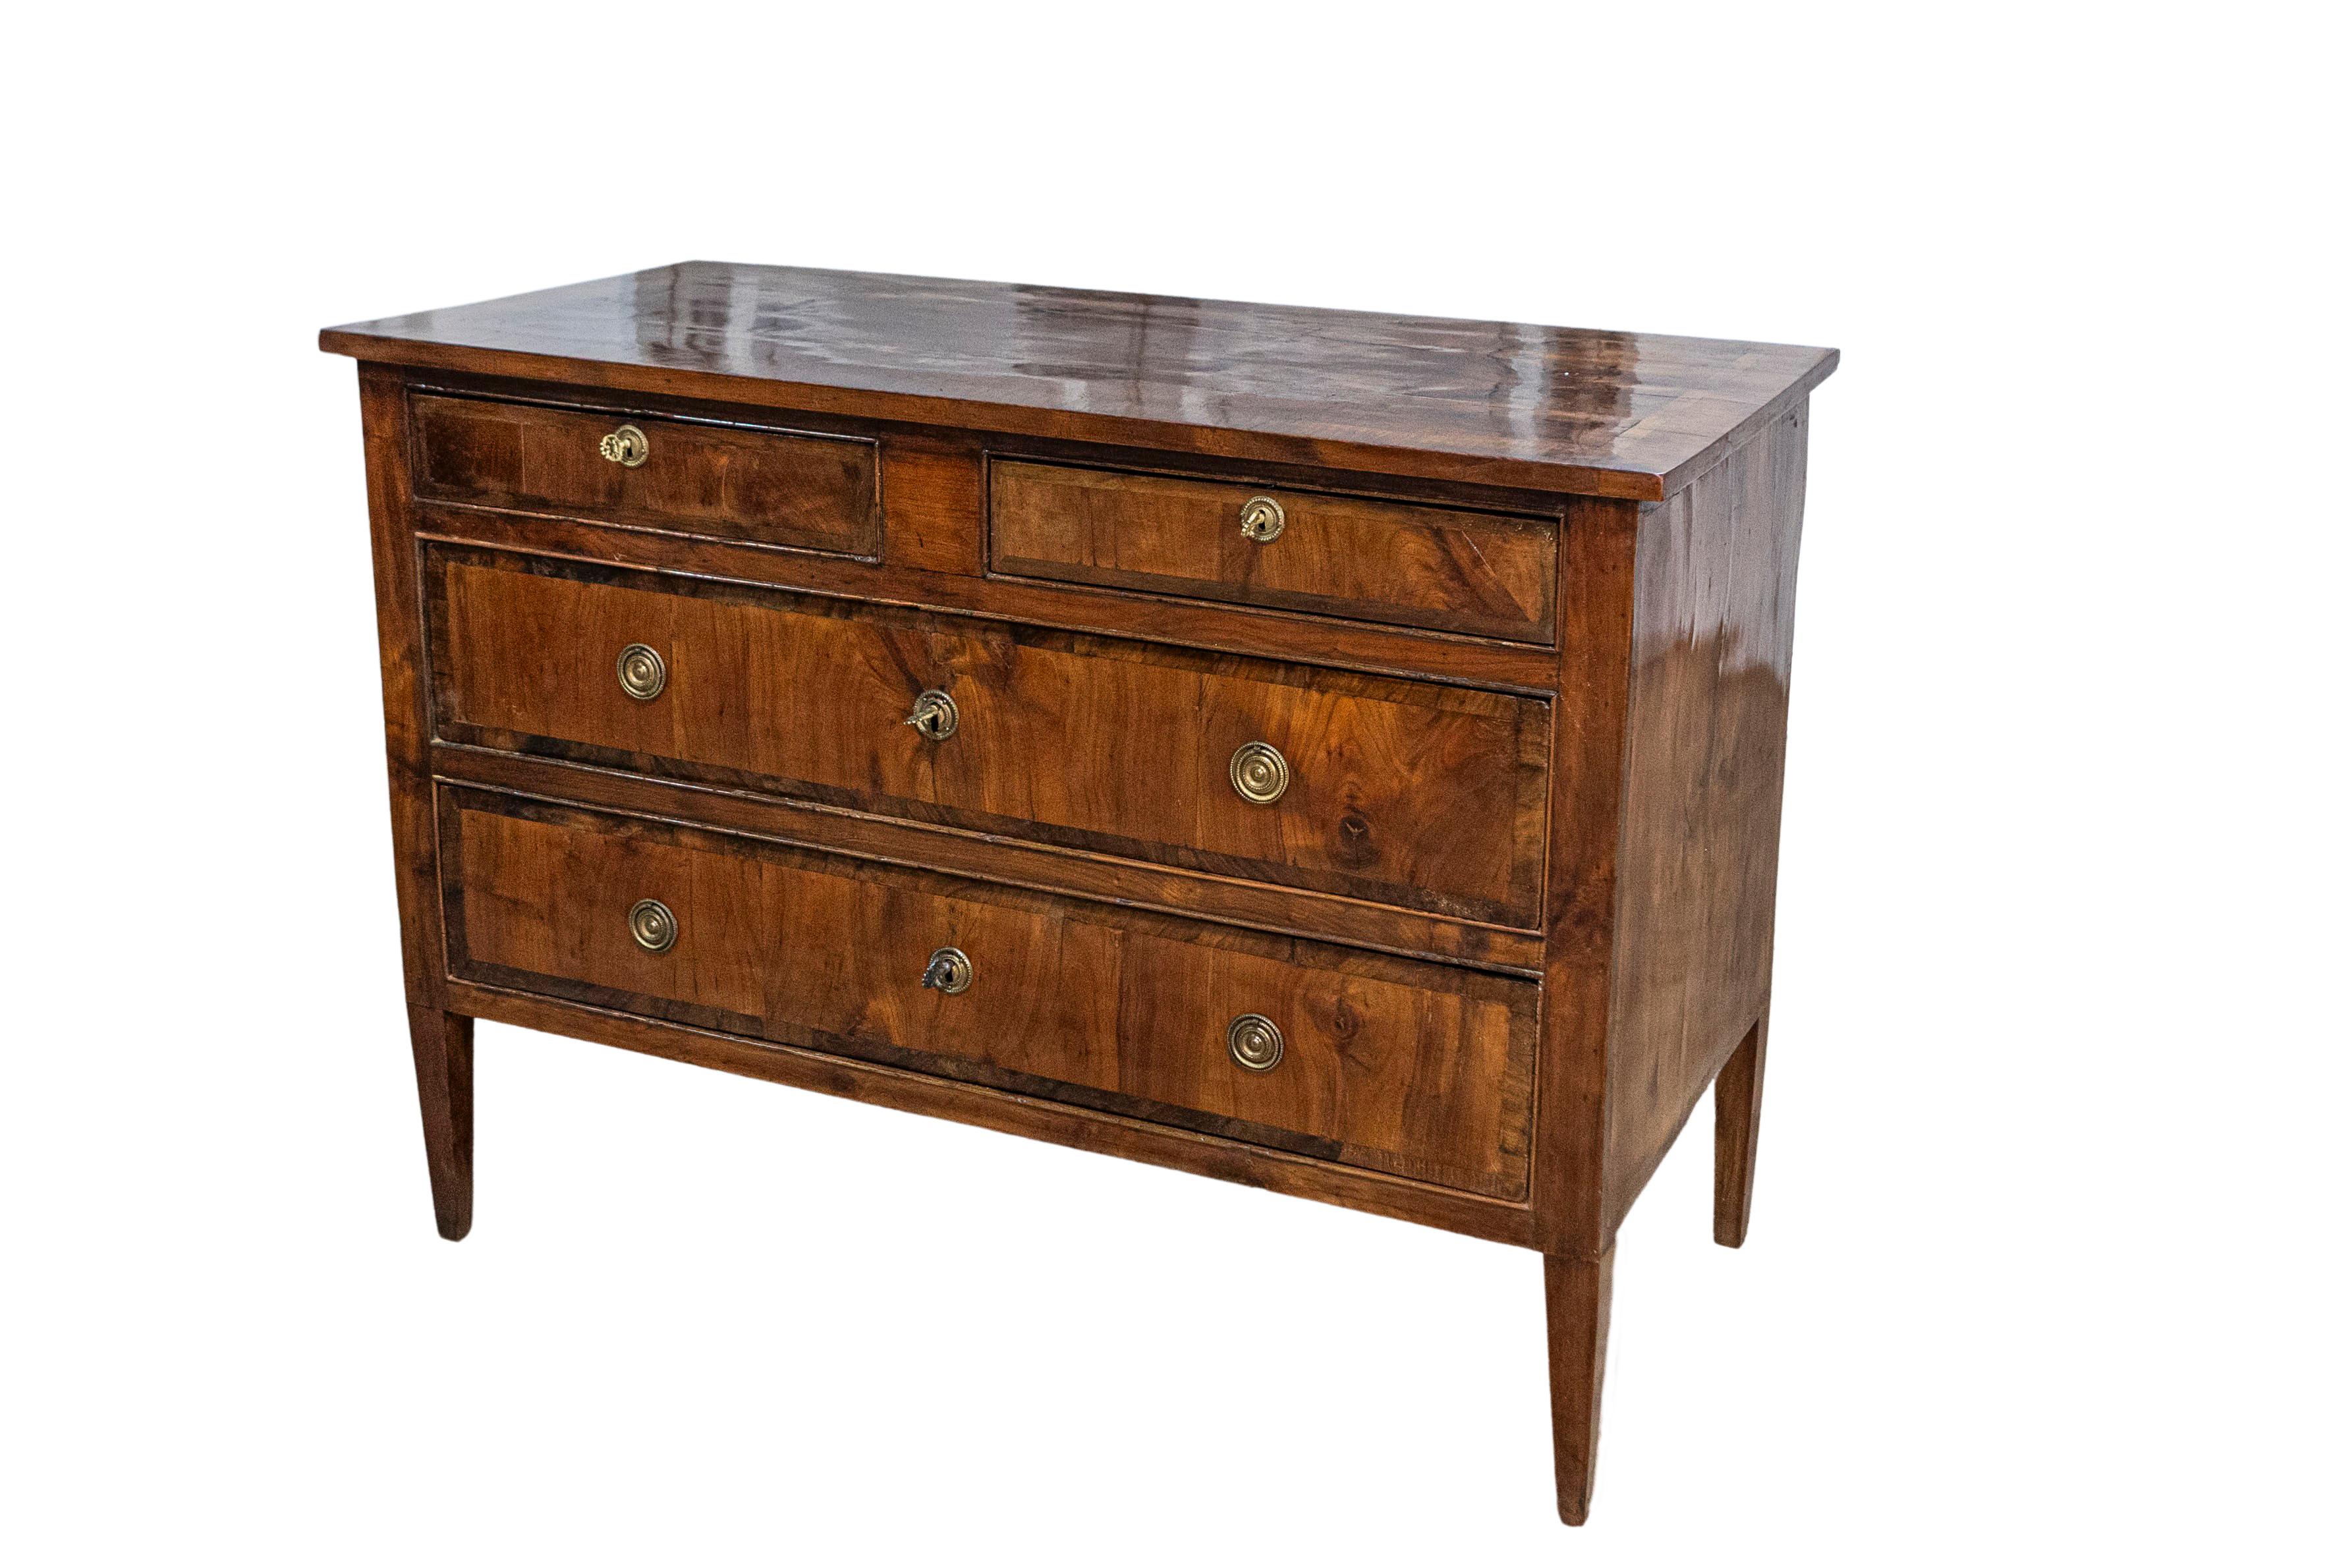 An Italian Neoclassical walnut commode from the 18th century with four drawers, cross-banding and tapered legs. This Italian walnut commode, dating back to the 18th century, presents a timeless elegance with its classic structure and fine details.